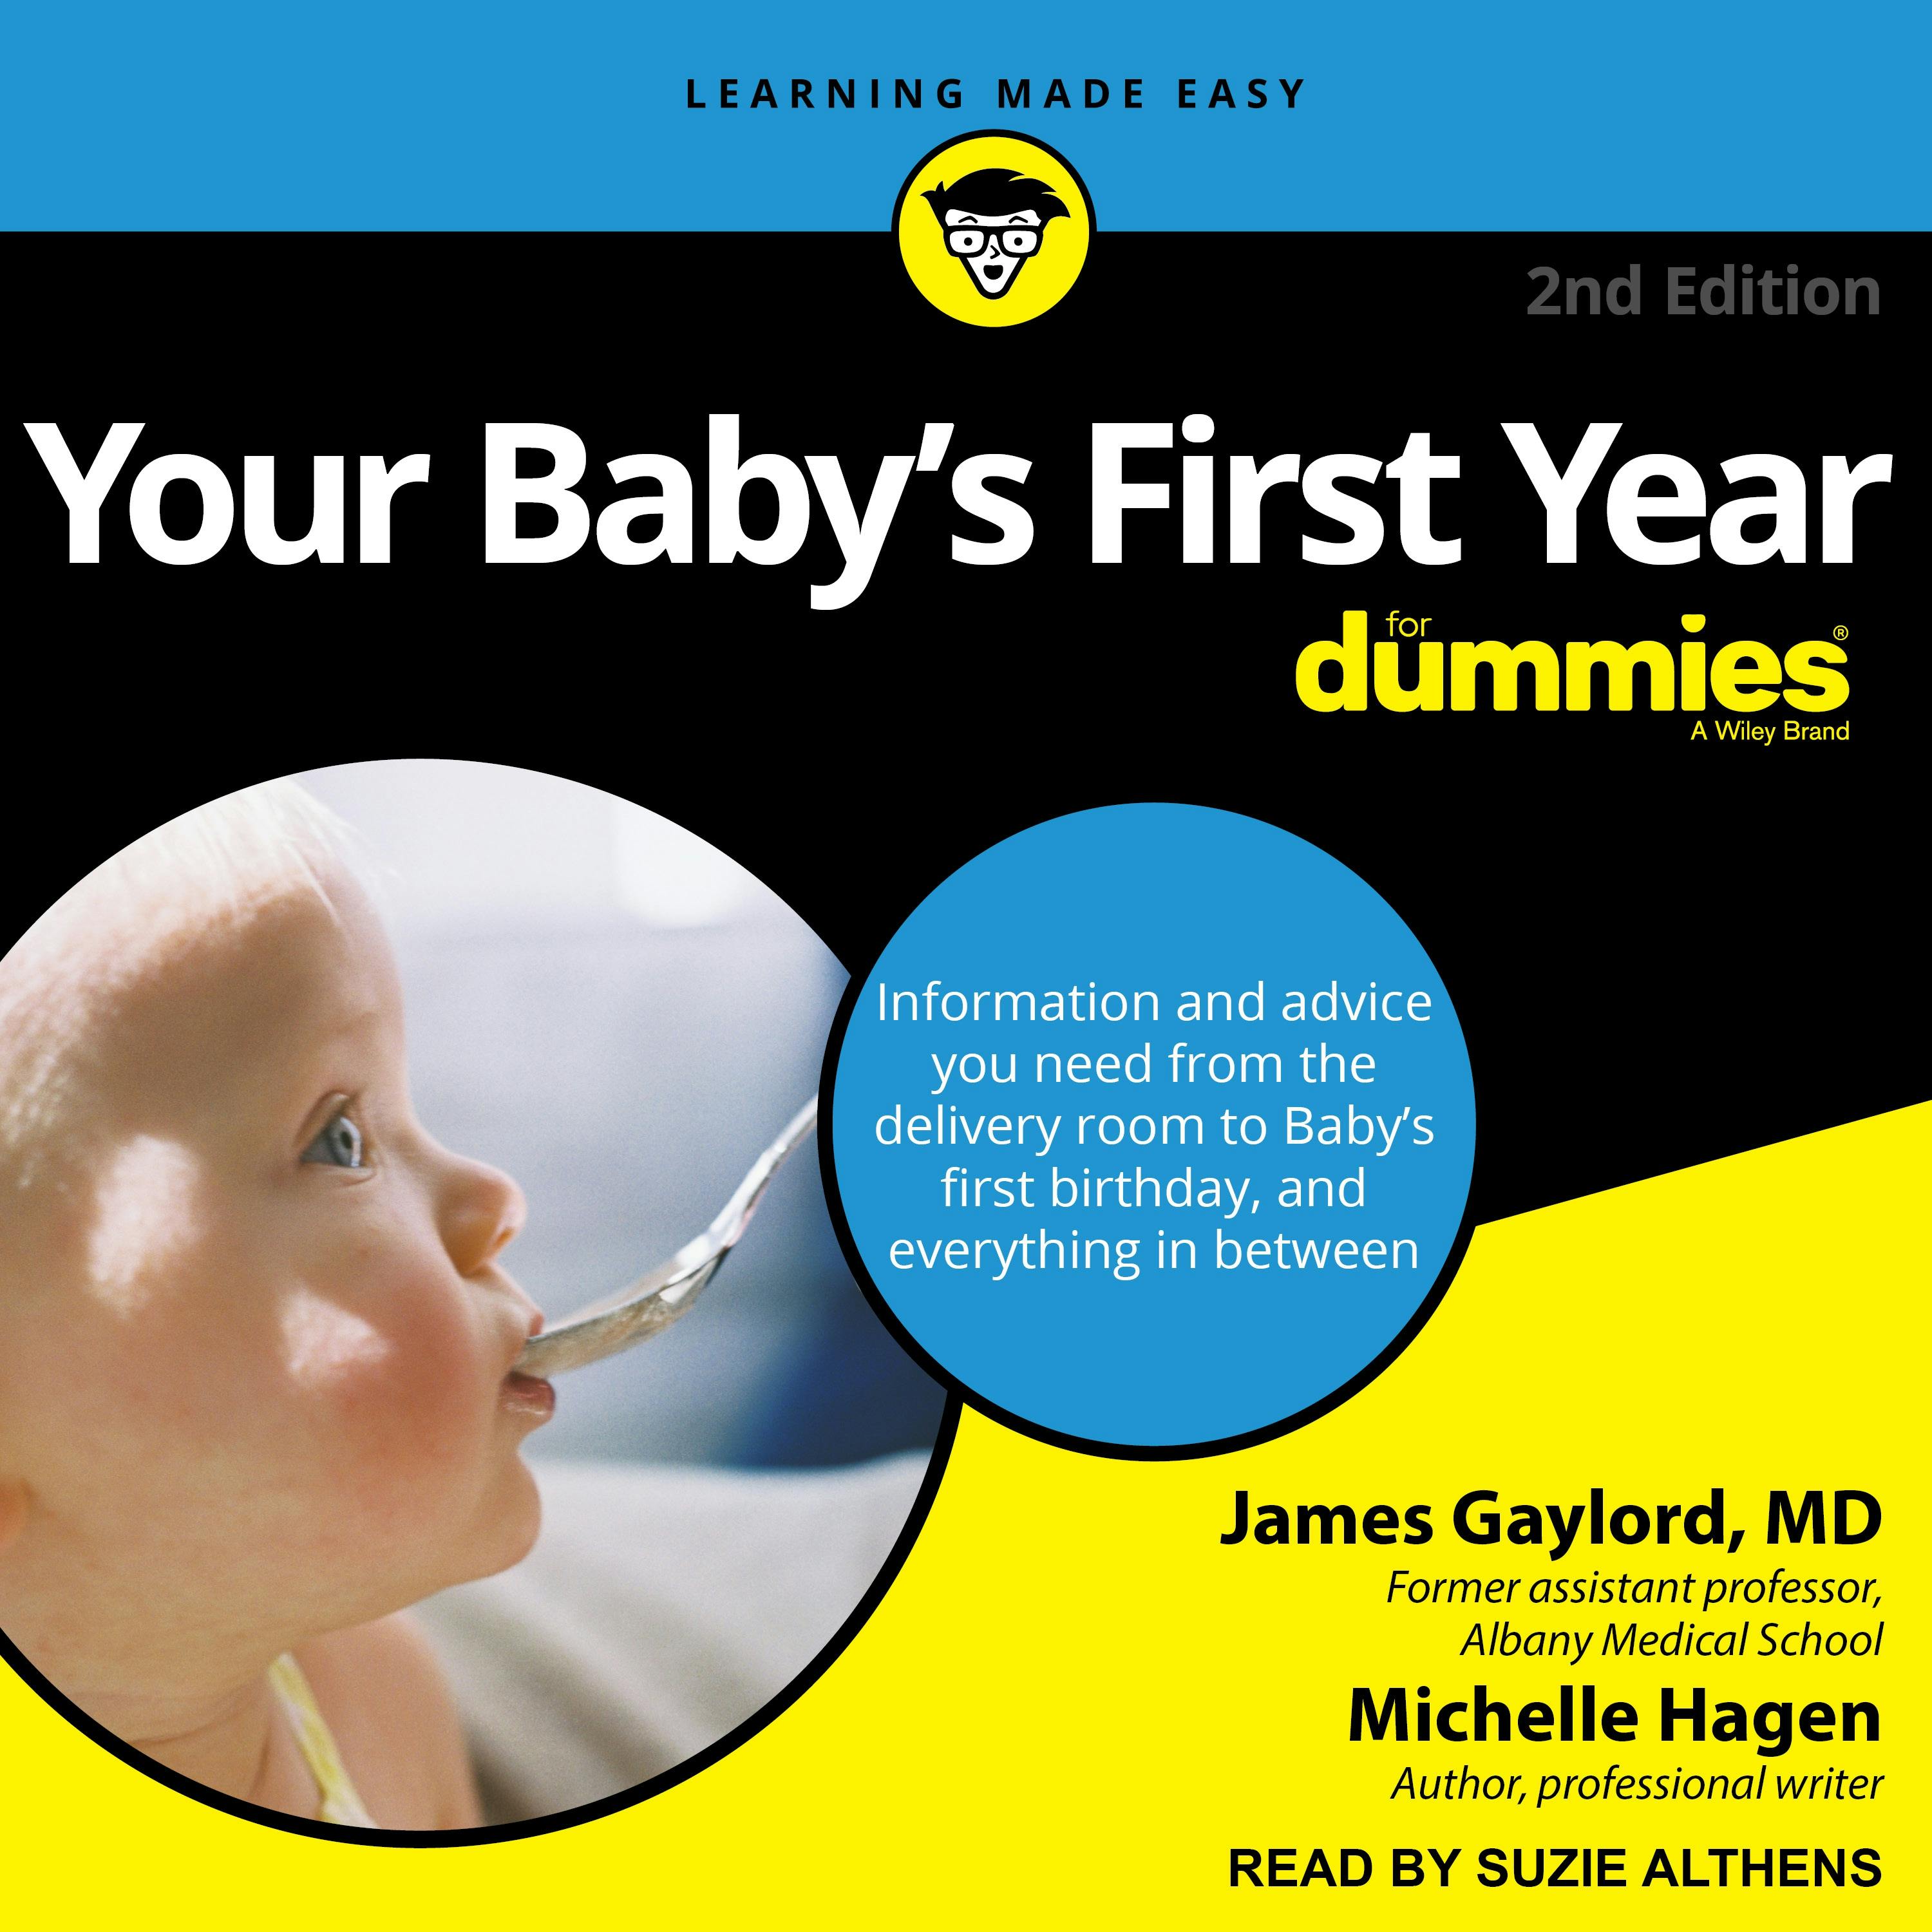 Your Baby's First Year For Dummies: A Wiley Brand - Michelle Hagen, James Gaylord, MD